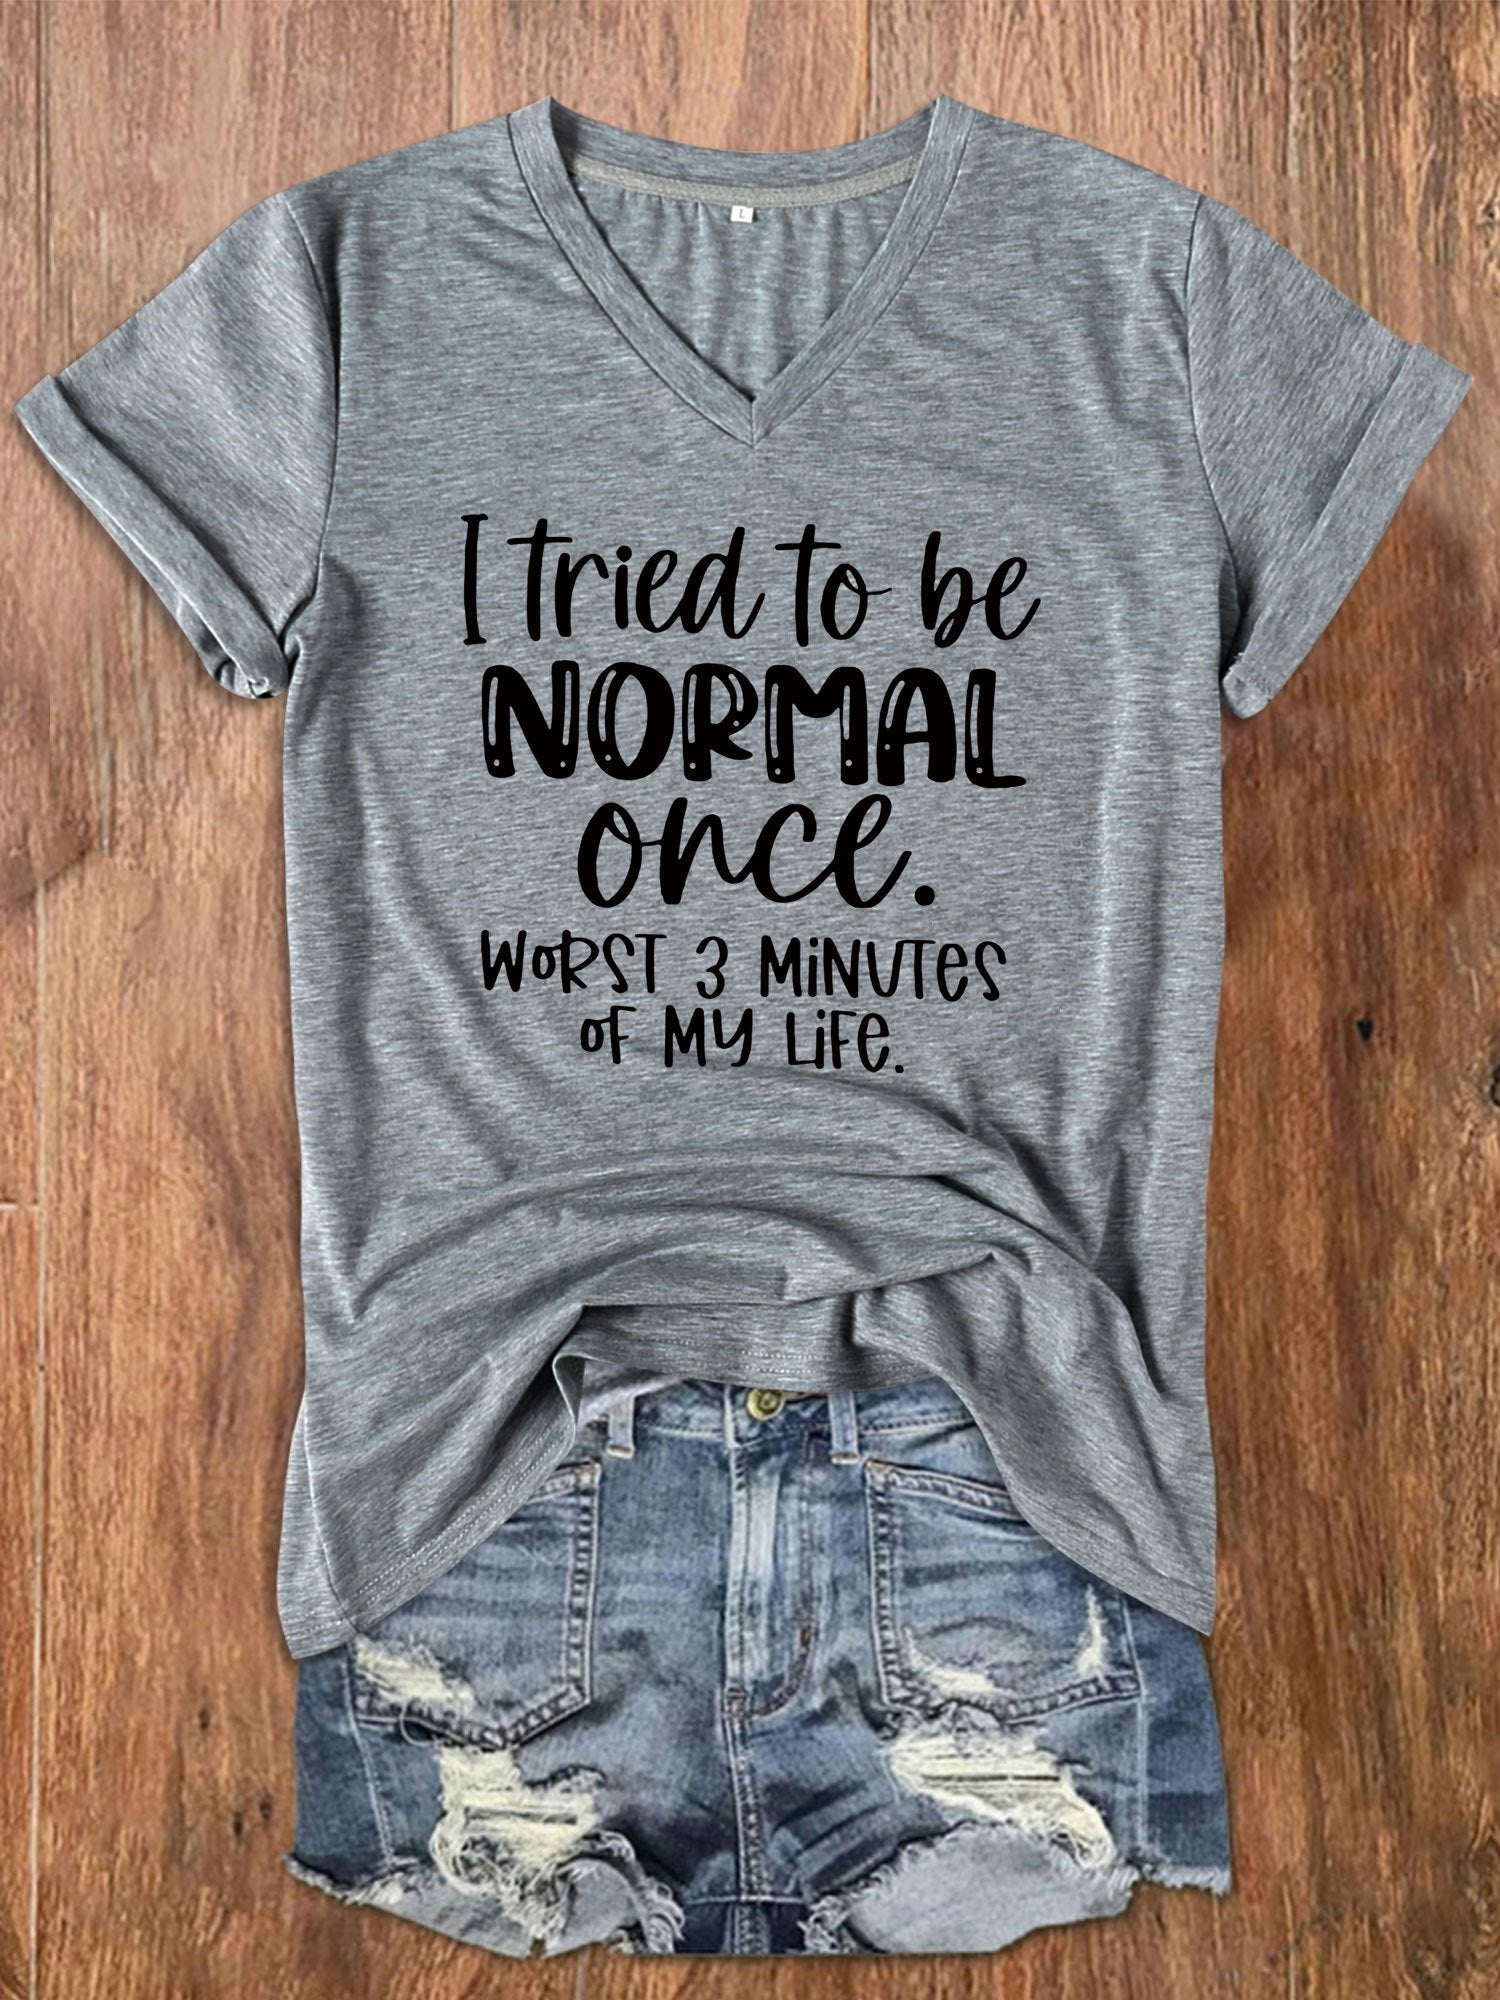 I Tried to Be Nopmal Once.Worst 3 Minutes of My LiFe V-neck T-shirt